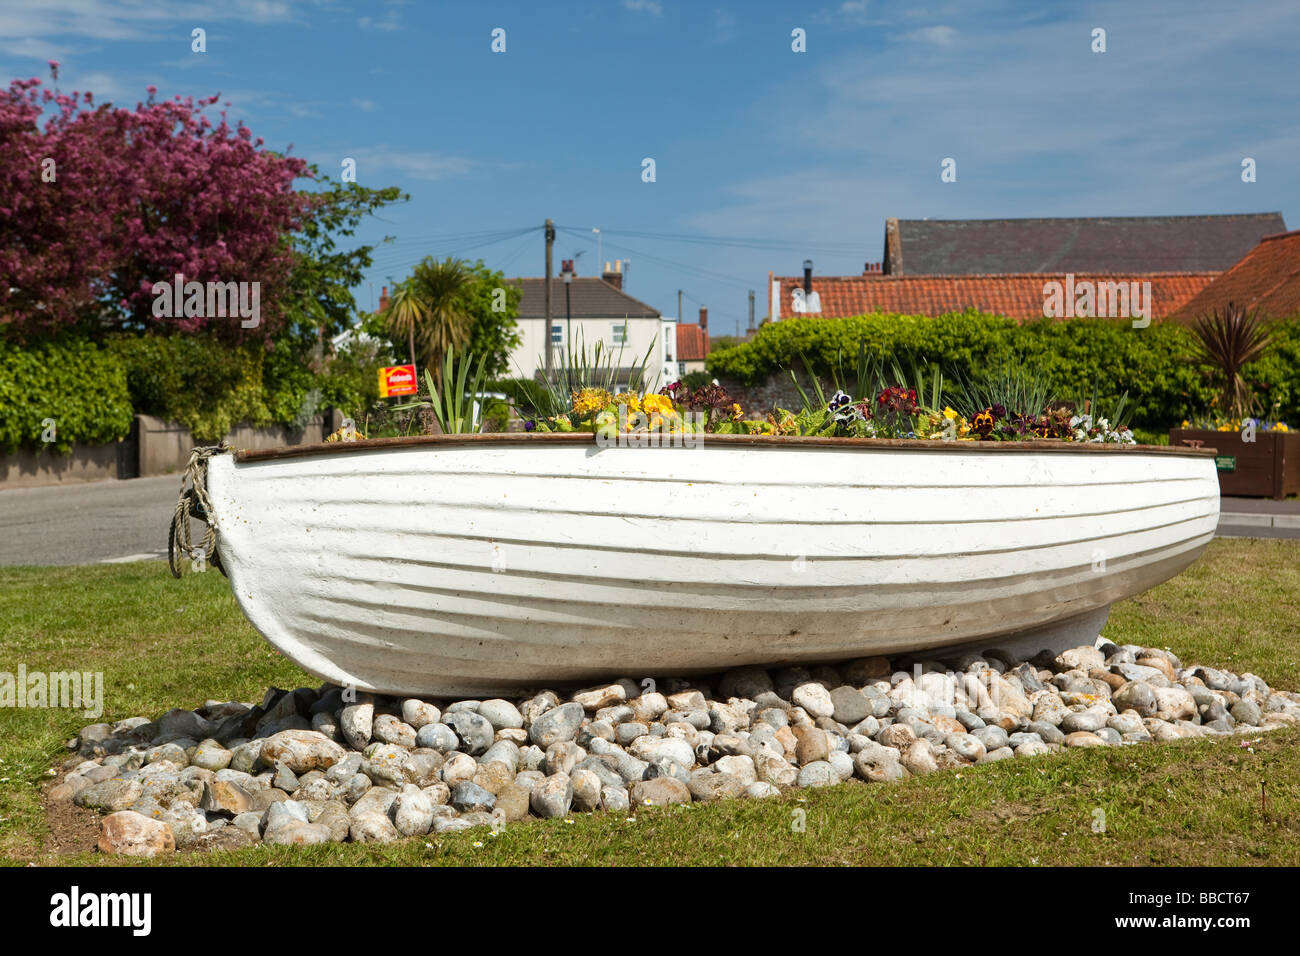 UK England Norfolk Winterton on Sea village white painted boat planted with flowers Stock Photo